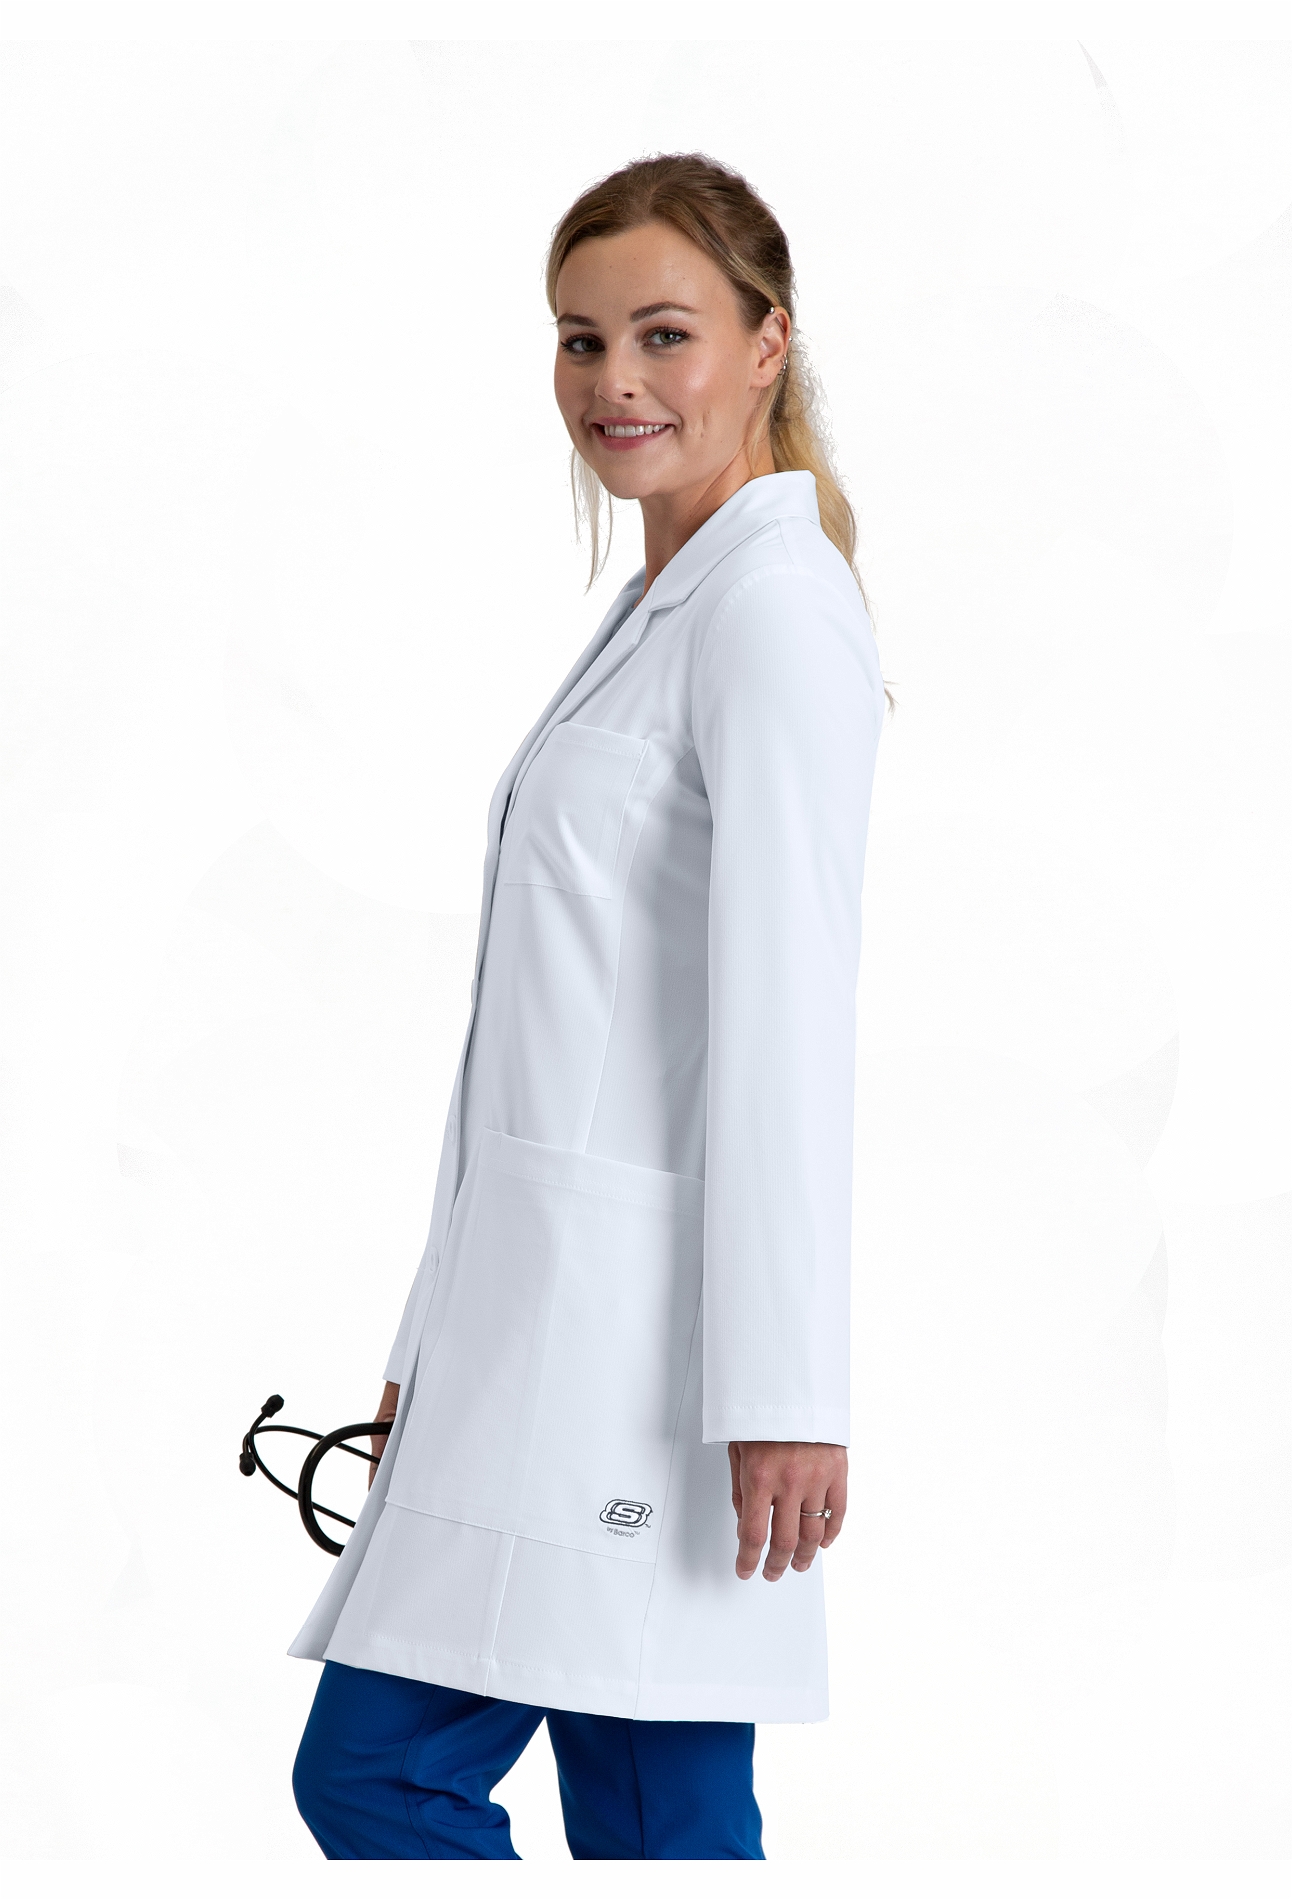 Skechers by Barco Women's Allure Labcoat-SKC952 | Medical Scrubs Collection